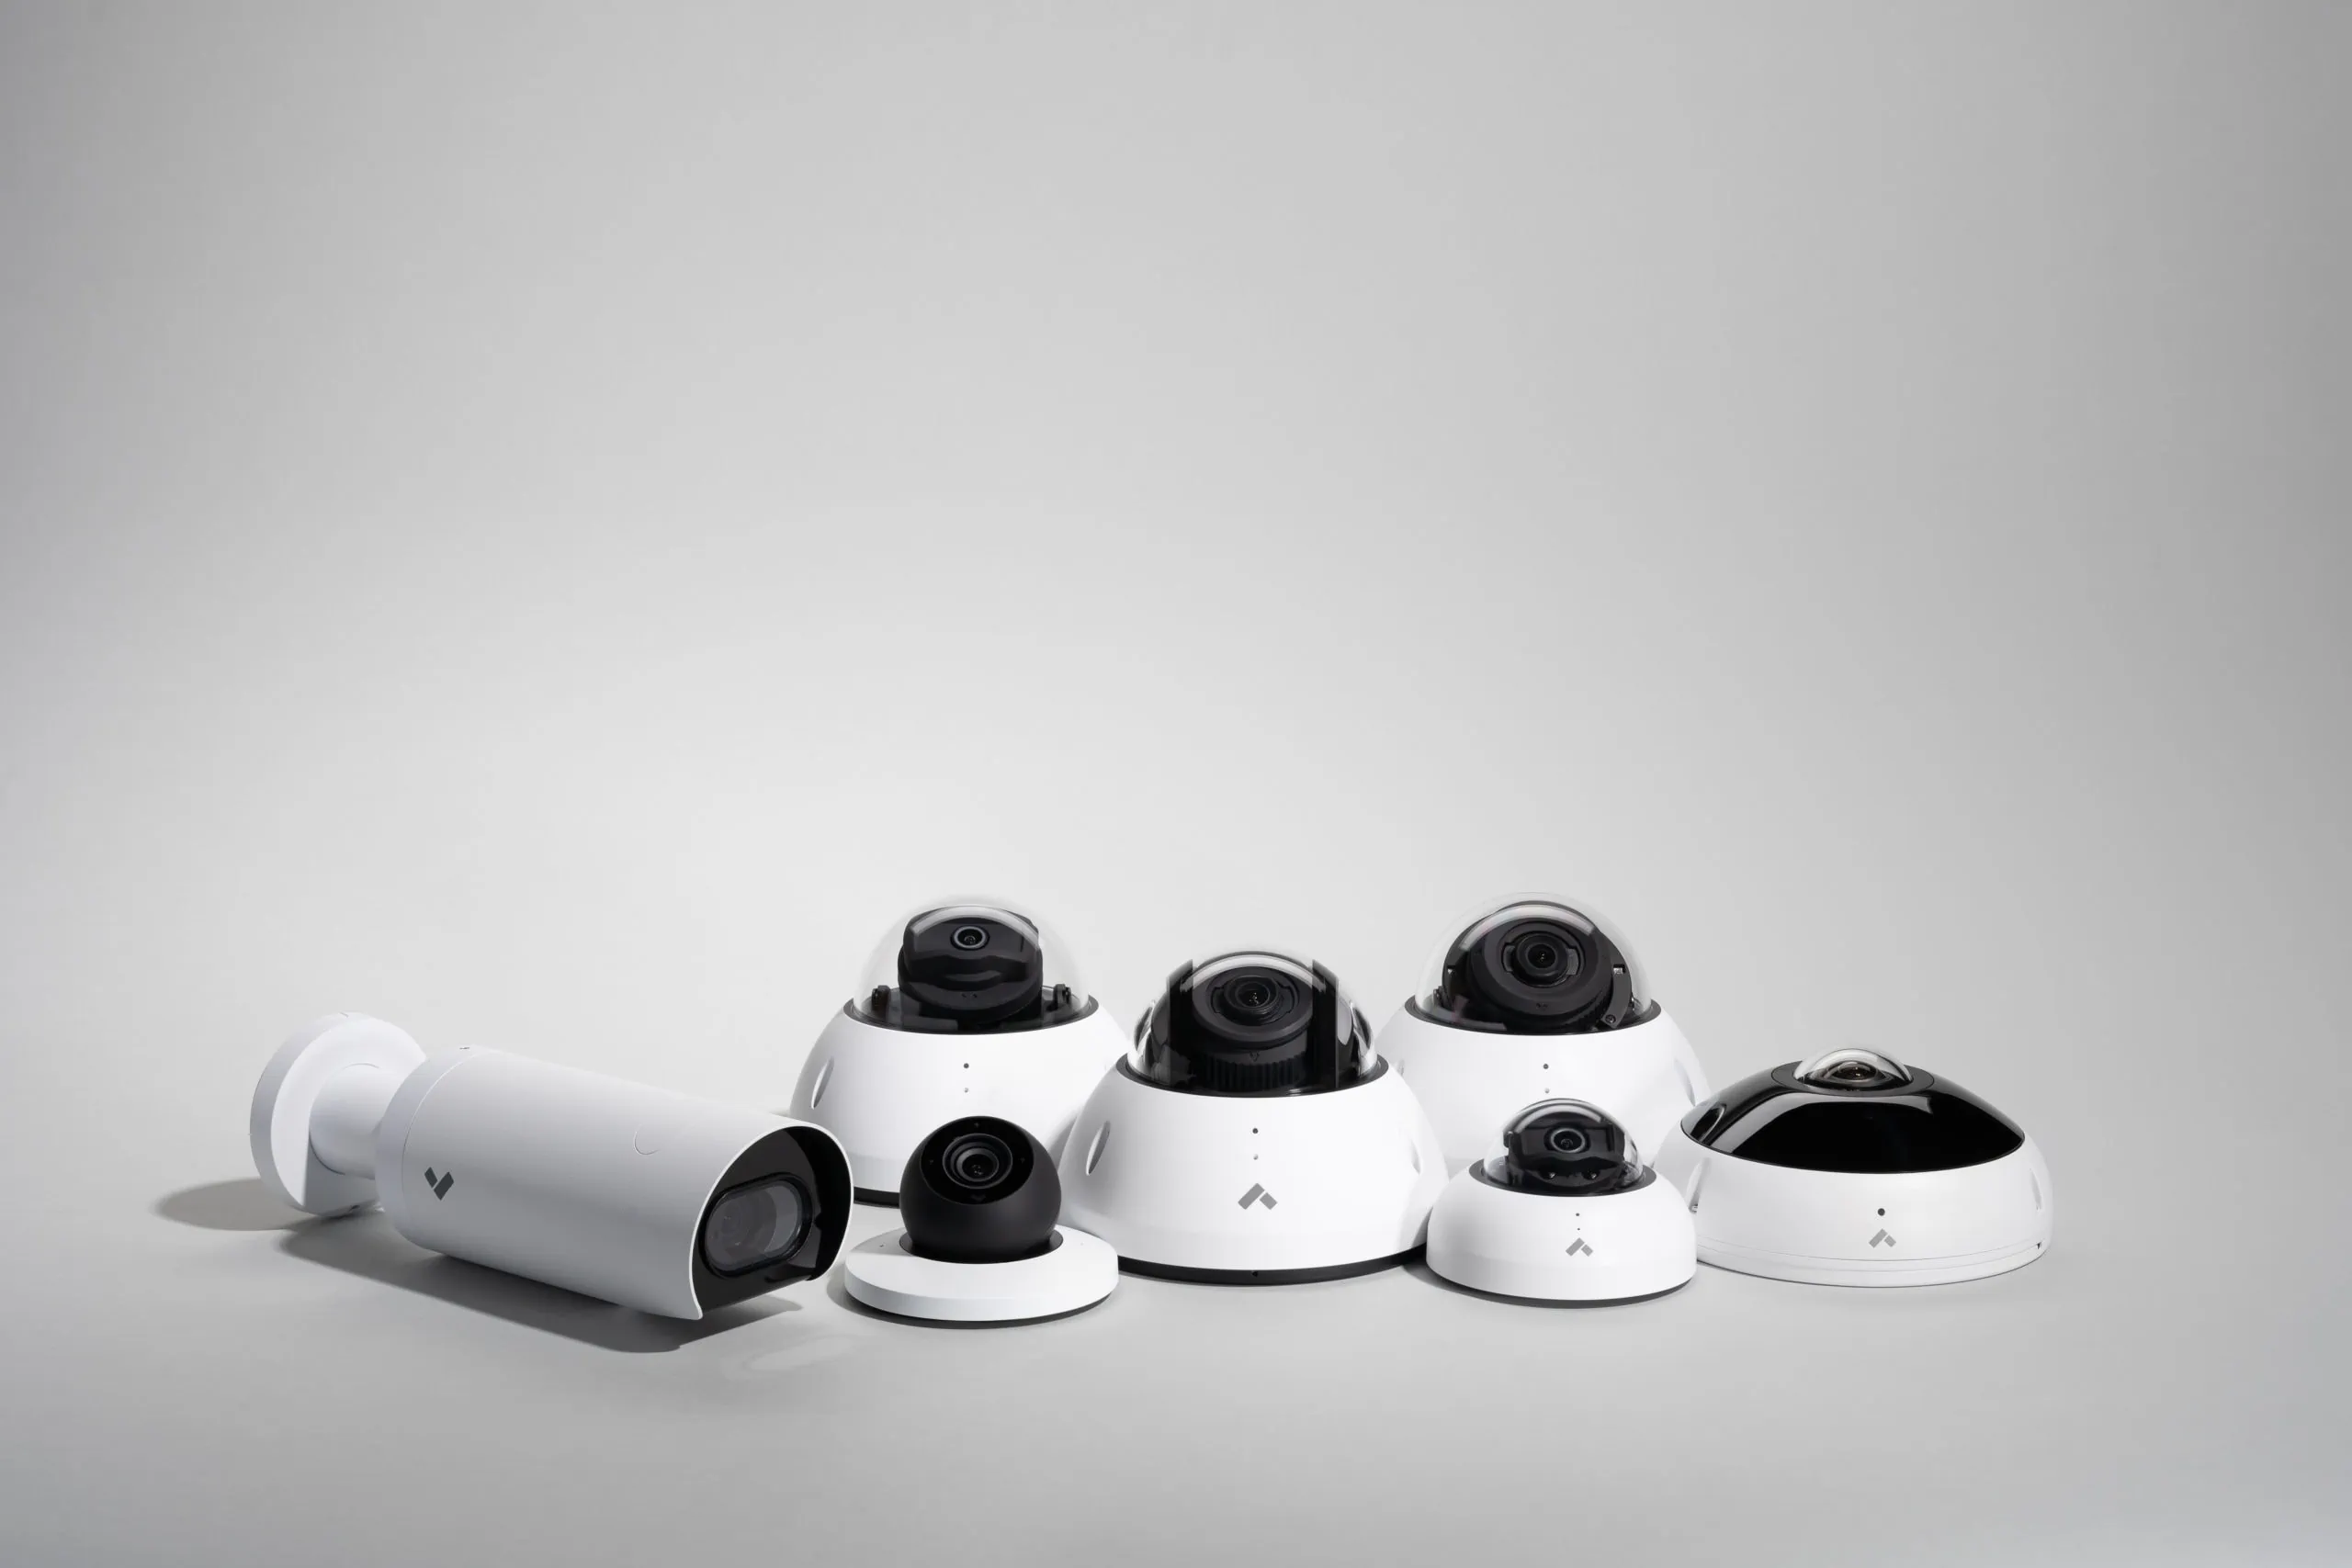 Verkada Camera Family includes panoramic security cameras for different viewing modes